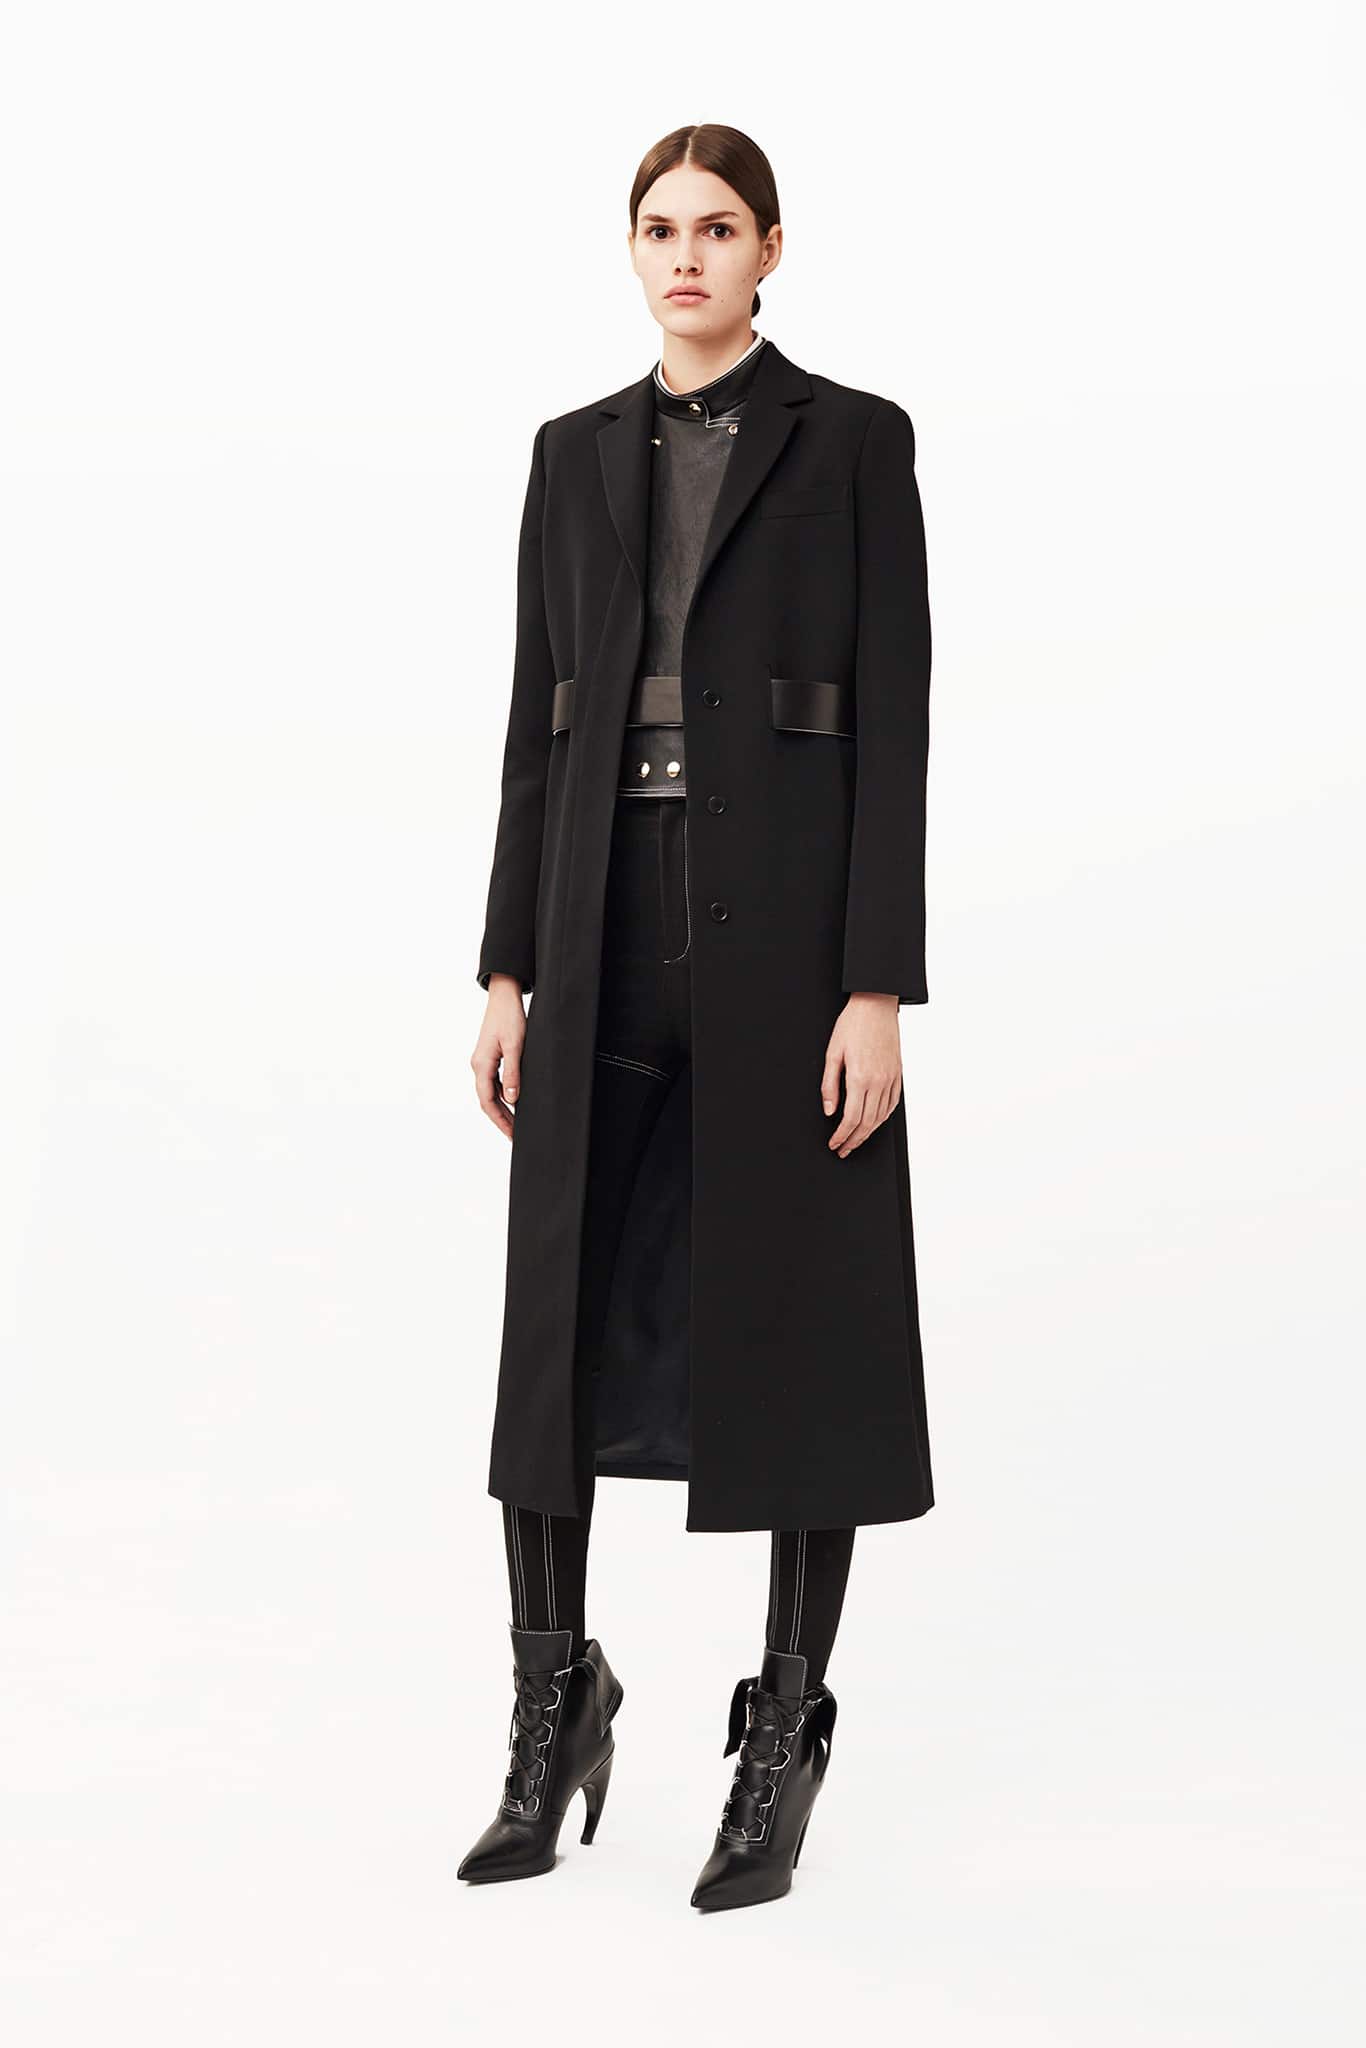 Givenchy Pre-Fall 2015 Lookbook featuring the Shark Bag | Spotted Fashion